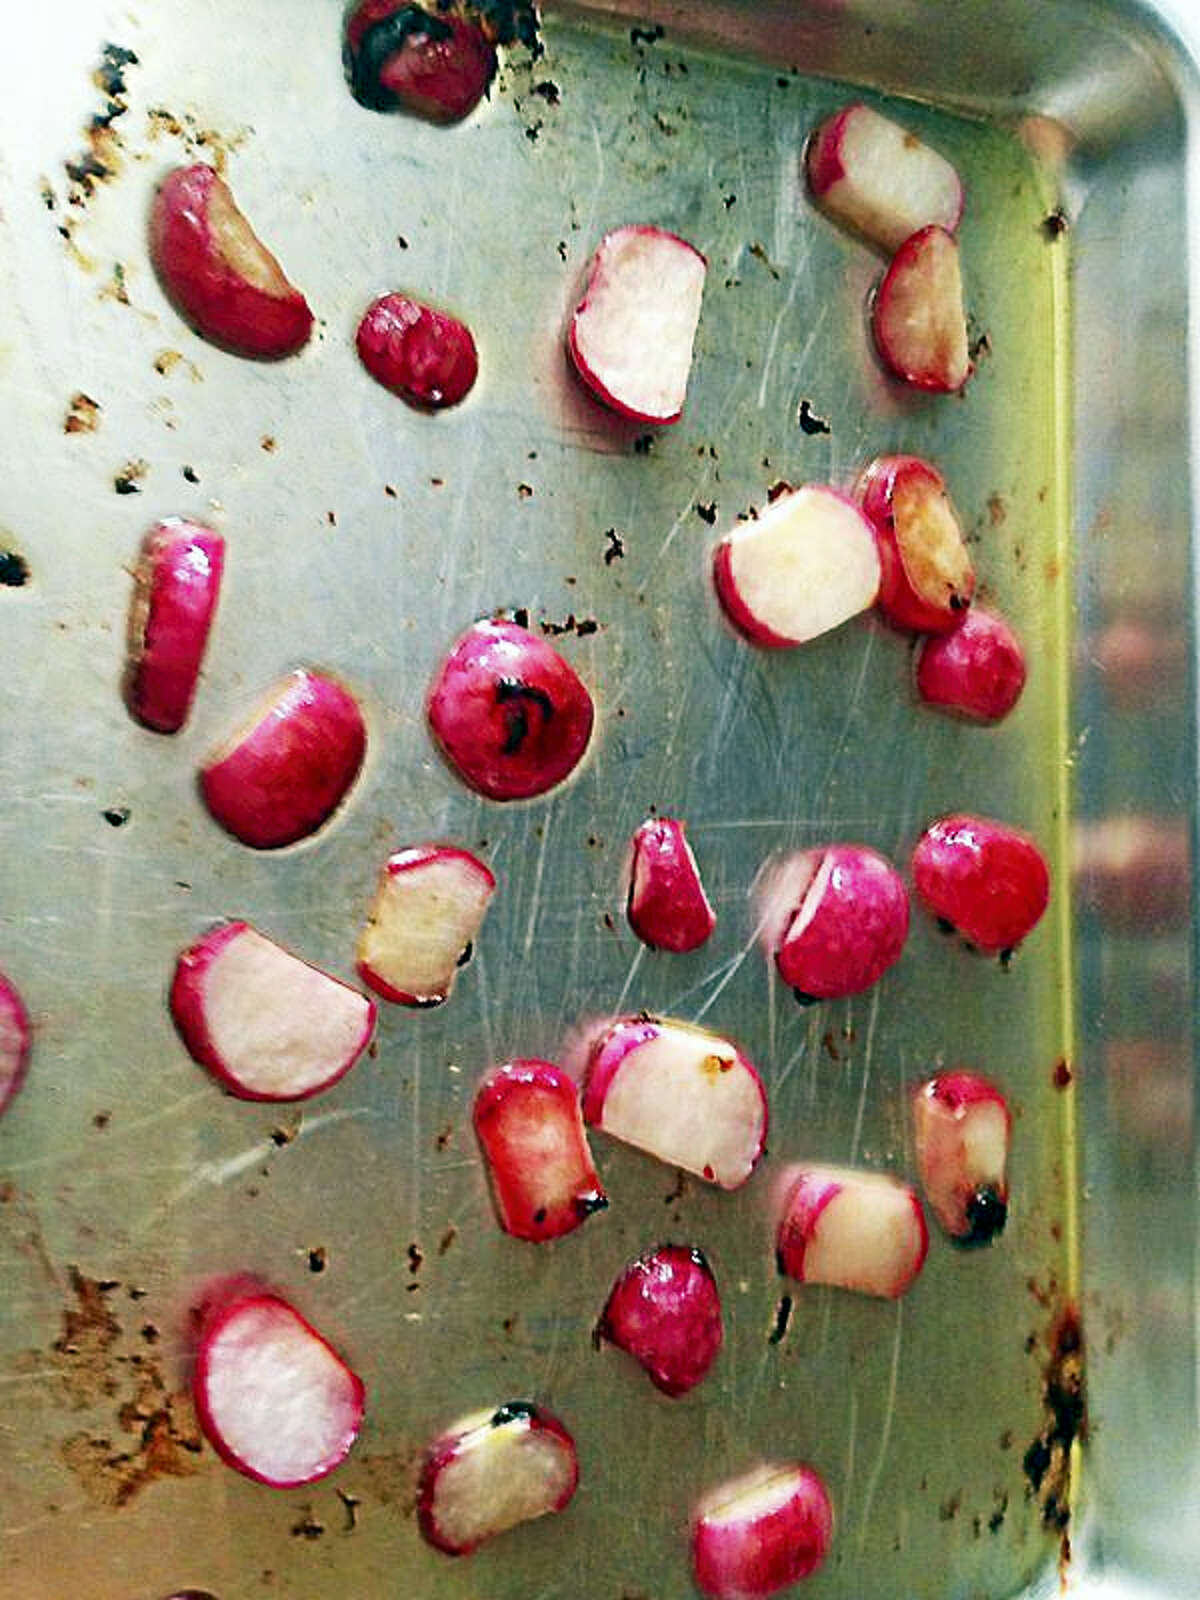 Not everyone likes radishes, but to cut the spice, try slicing thin and roasting with olive oil and honey. It's quite the treat! (Anna Bisaro - New Haven Register)